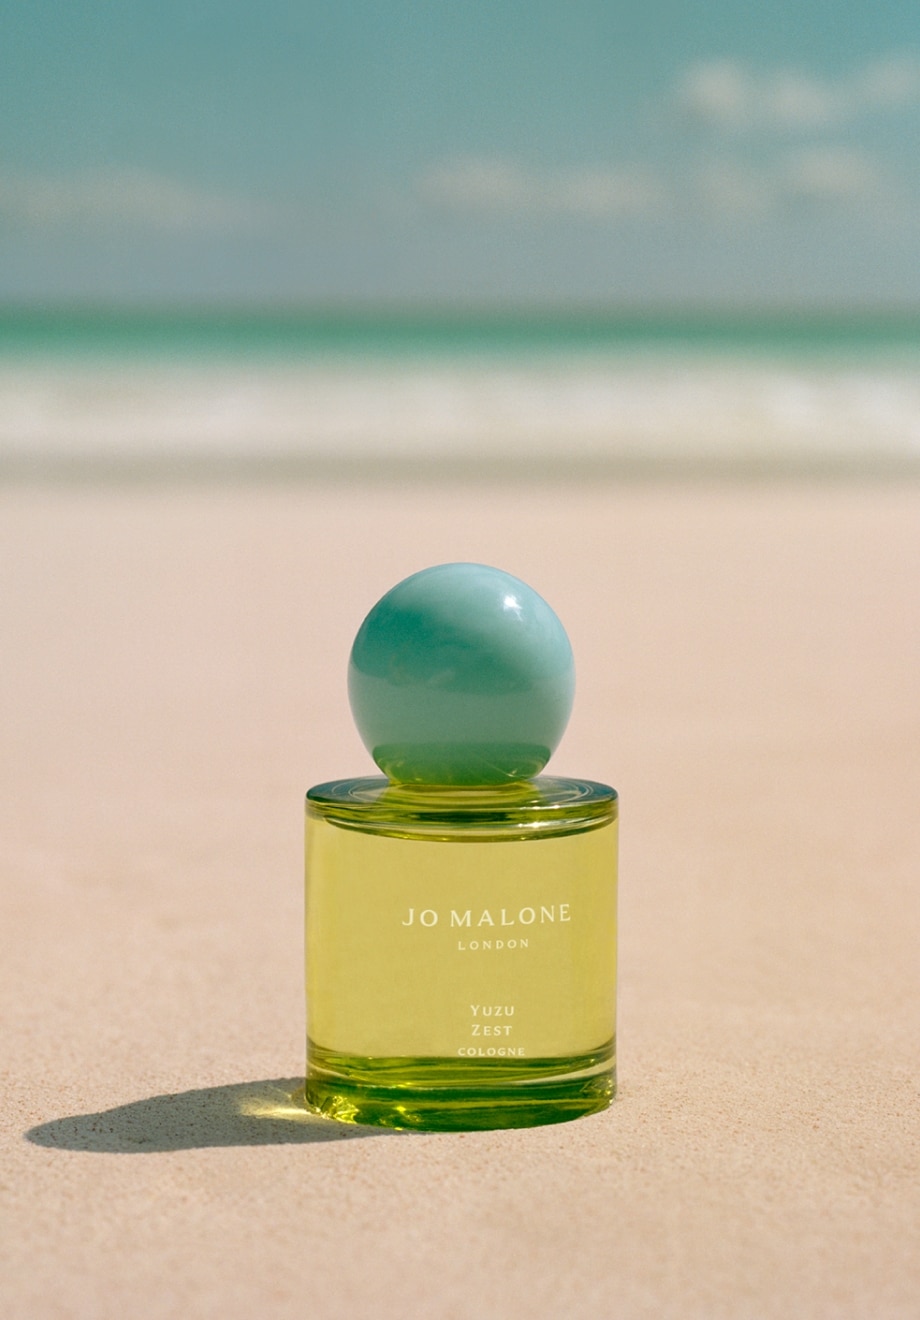 Jo Malone London Yuzu Zest cologne sat on a tropical beach. A clear yellow bottle with turquoise cap.